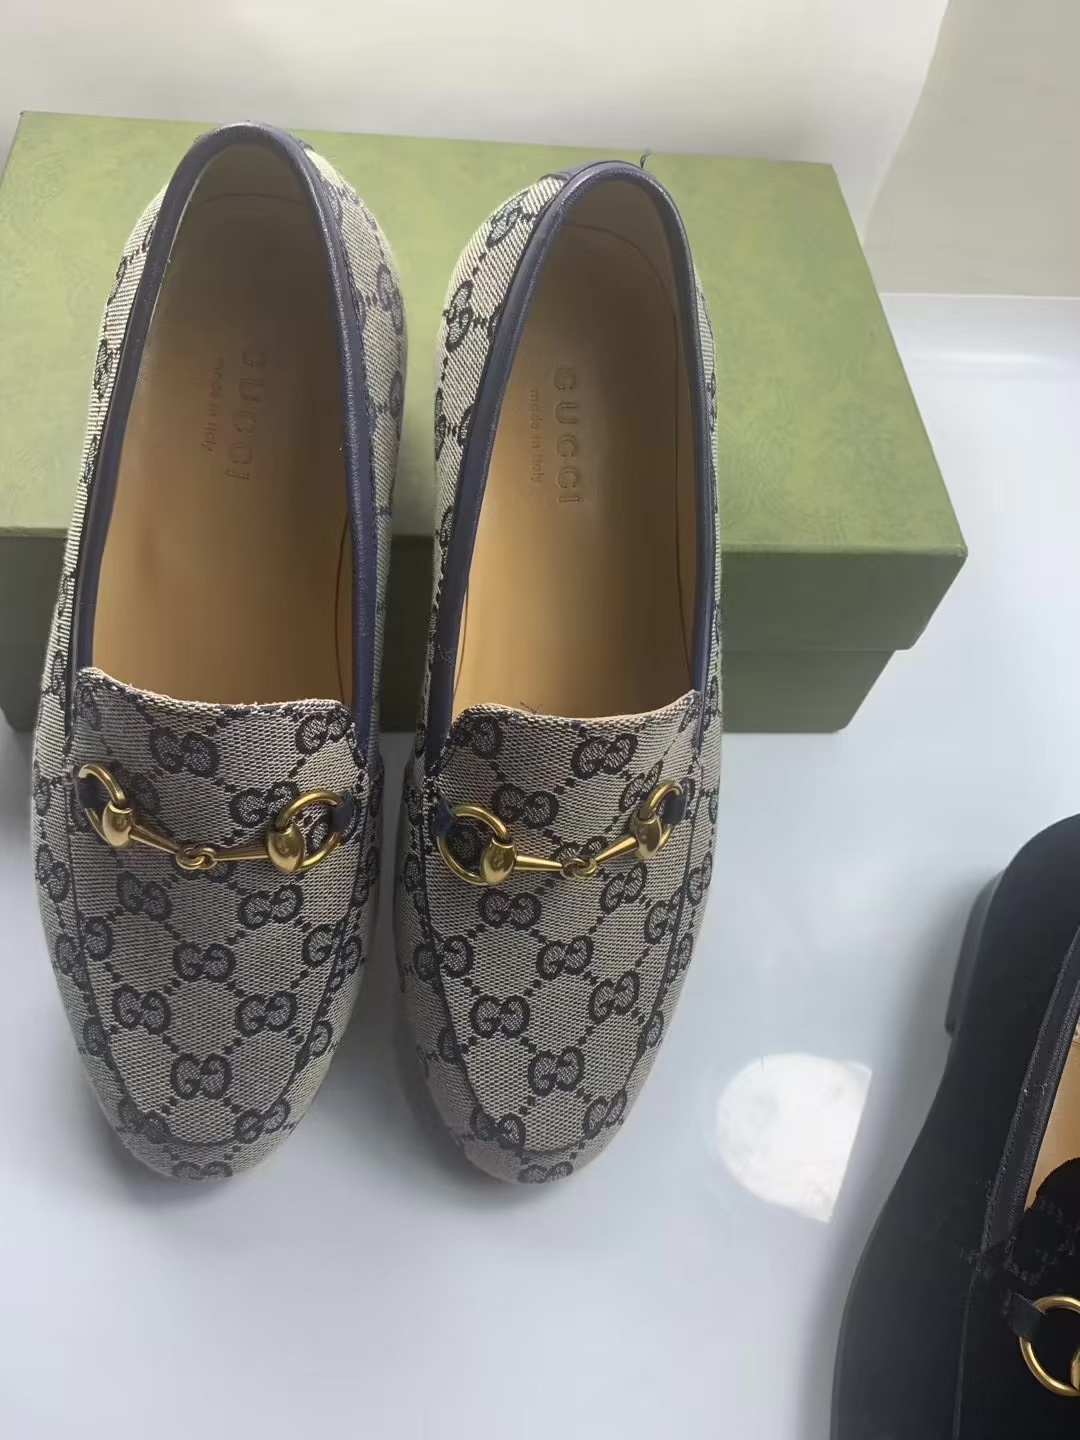 Gucci Horsebit Loafer Unisex # 264754, cheap Gucci Dress Shoes, only $89!